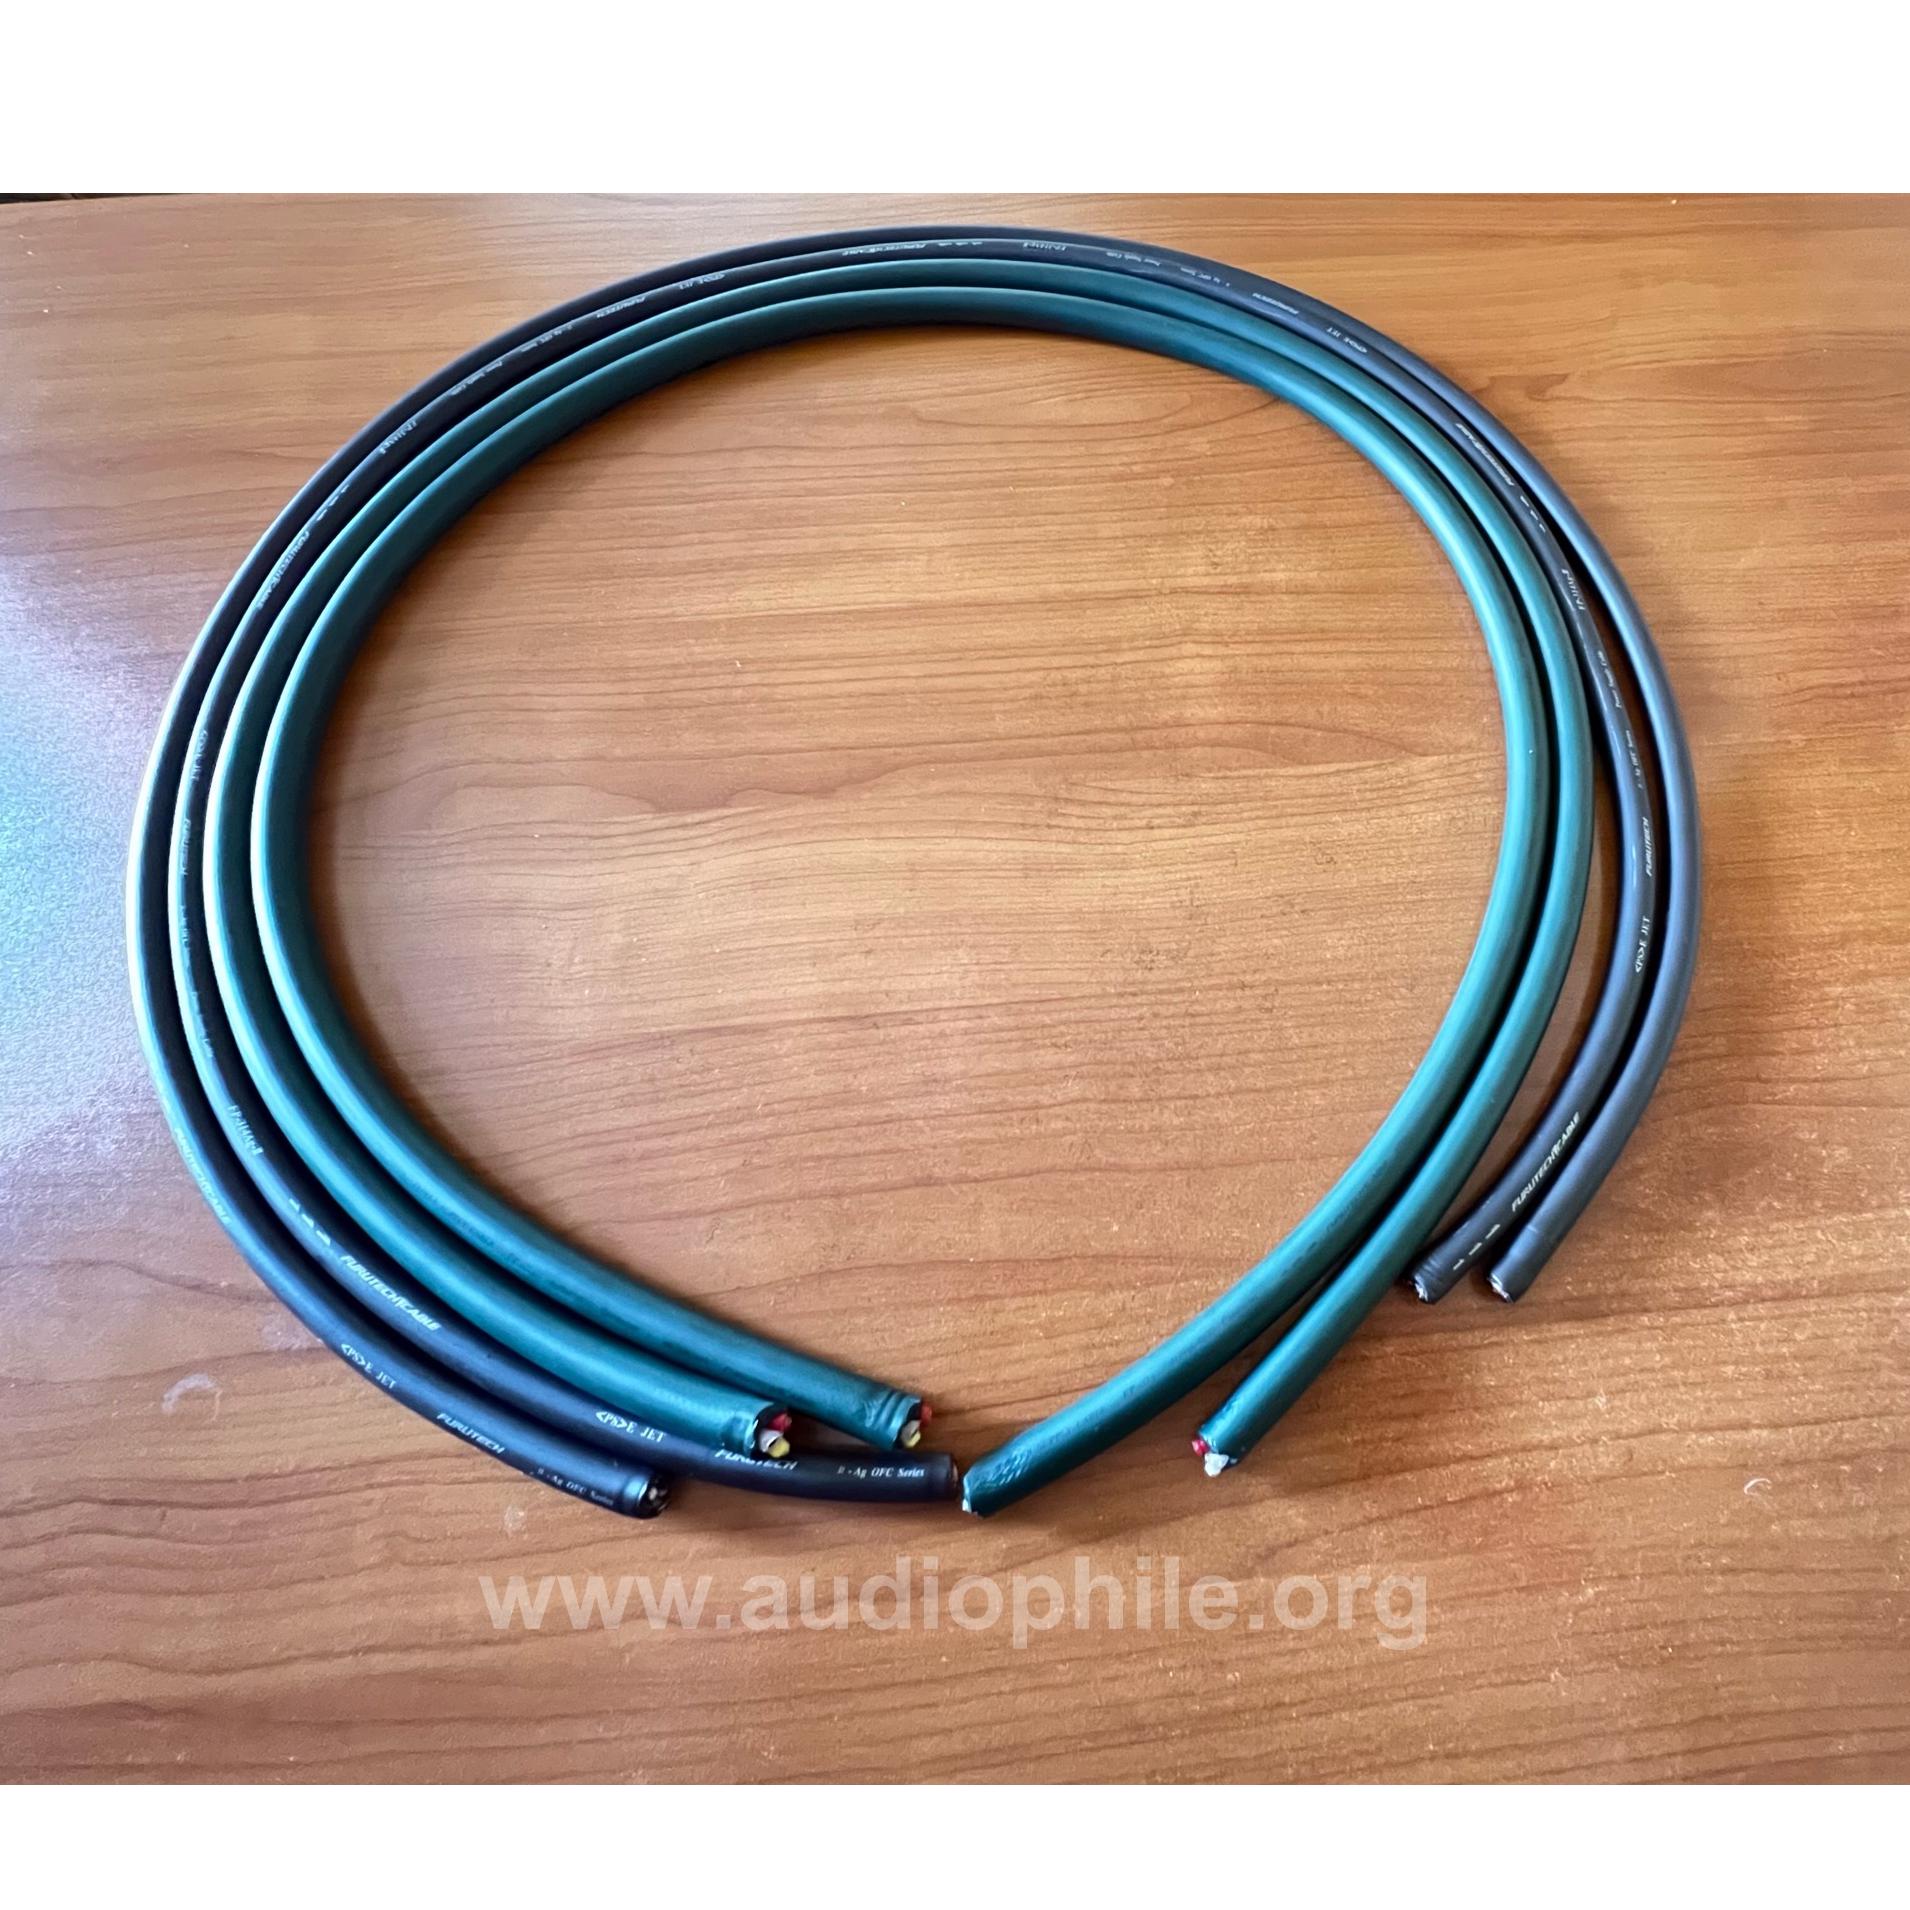 Furutech power cable